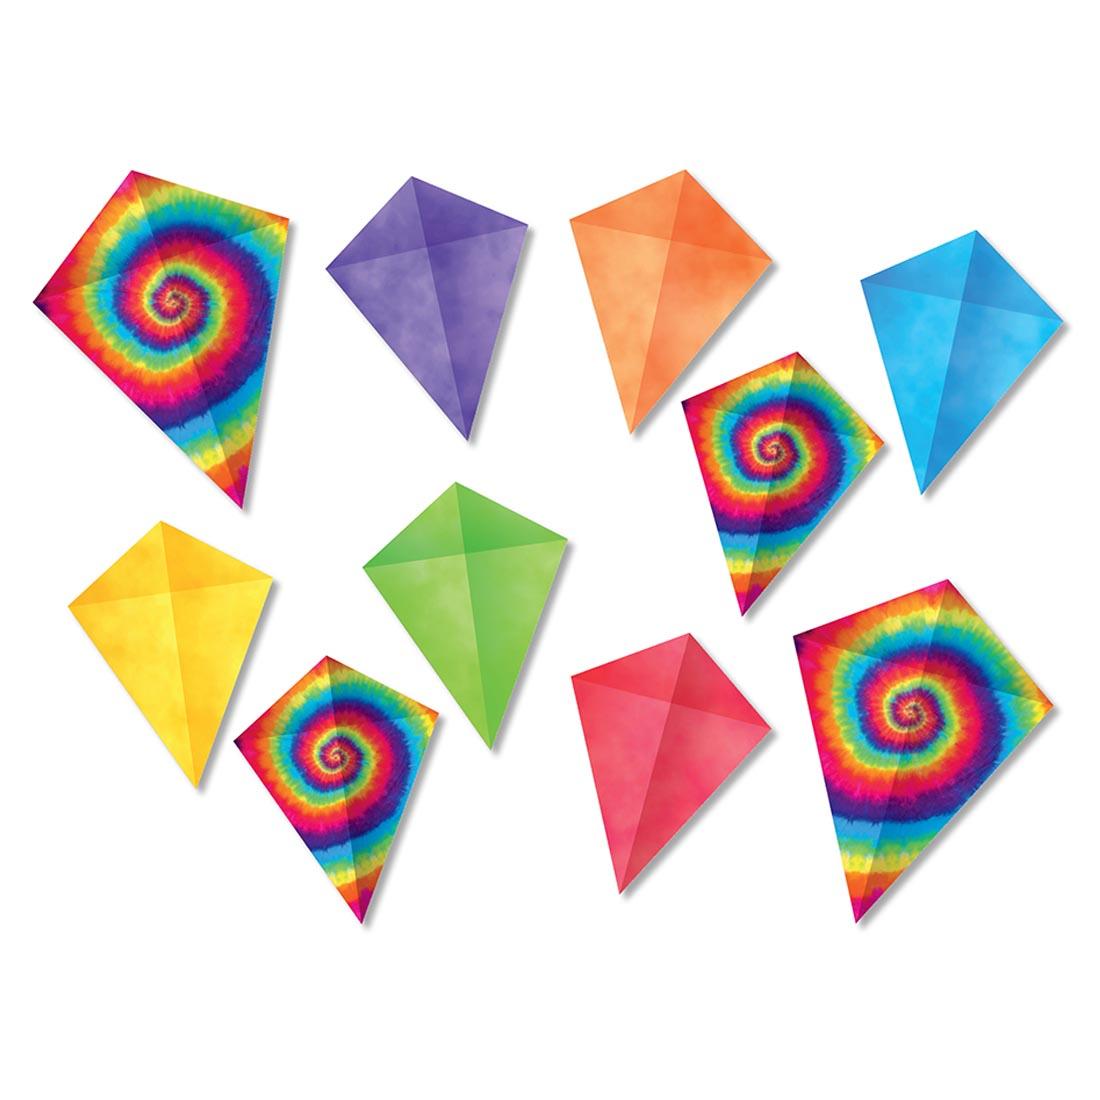 decorative paper kites in assorted colors